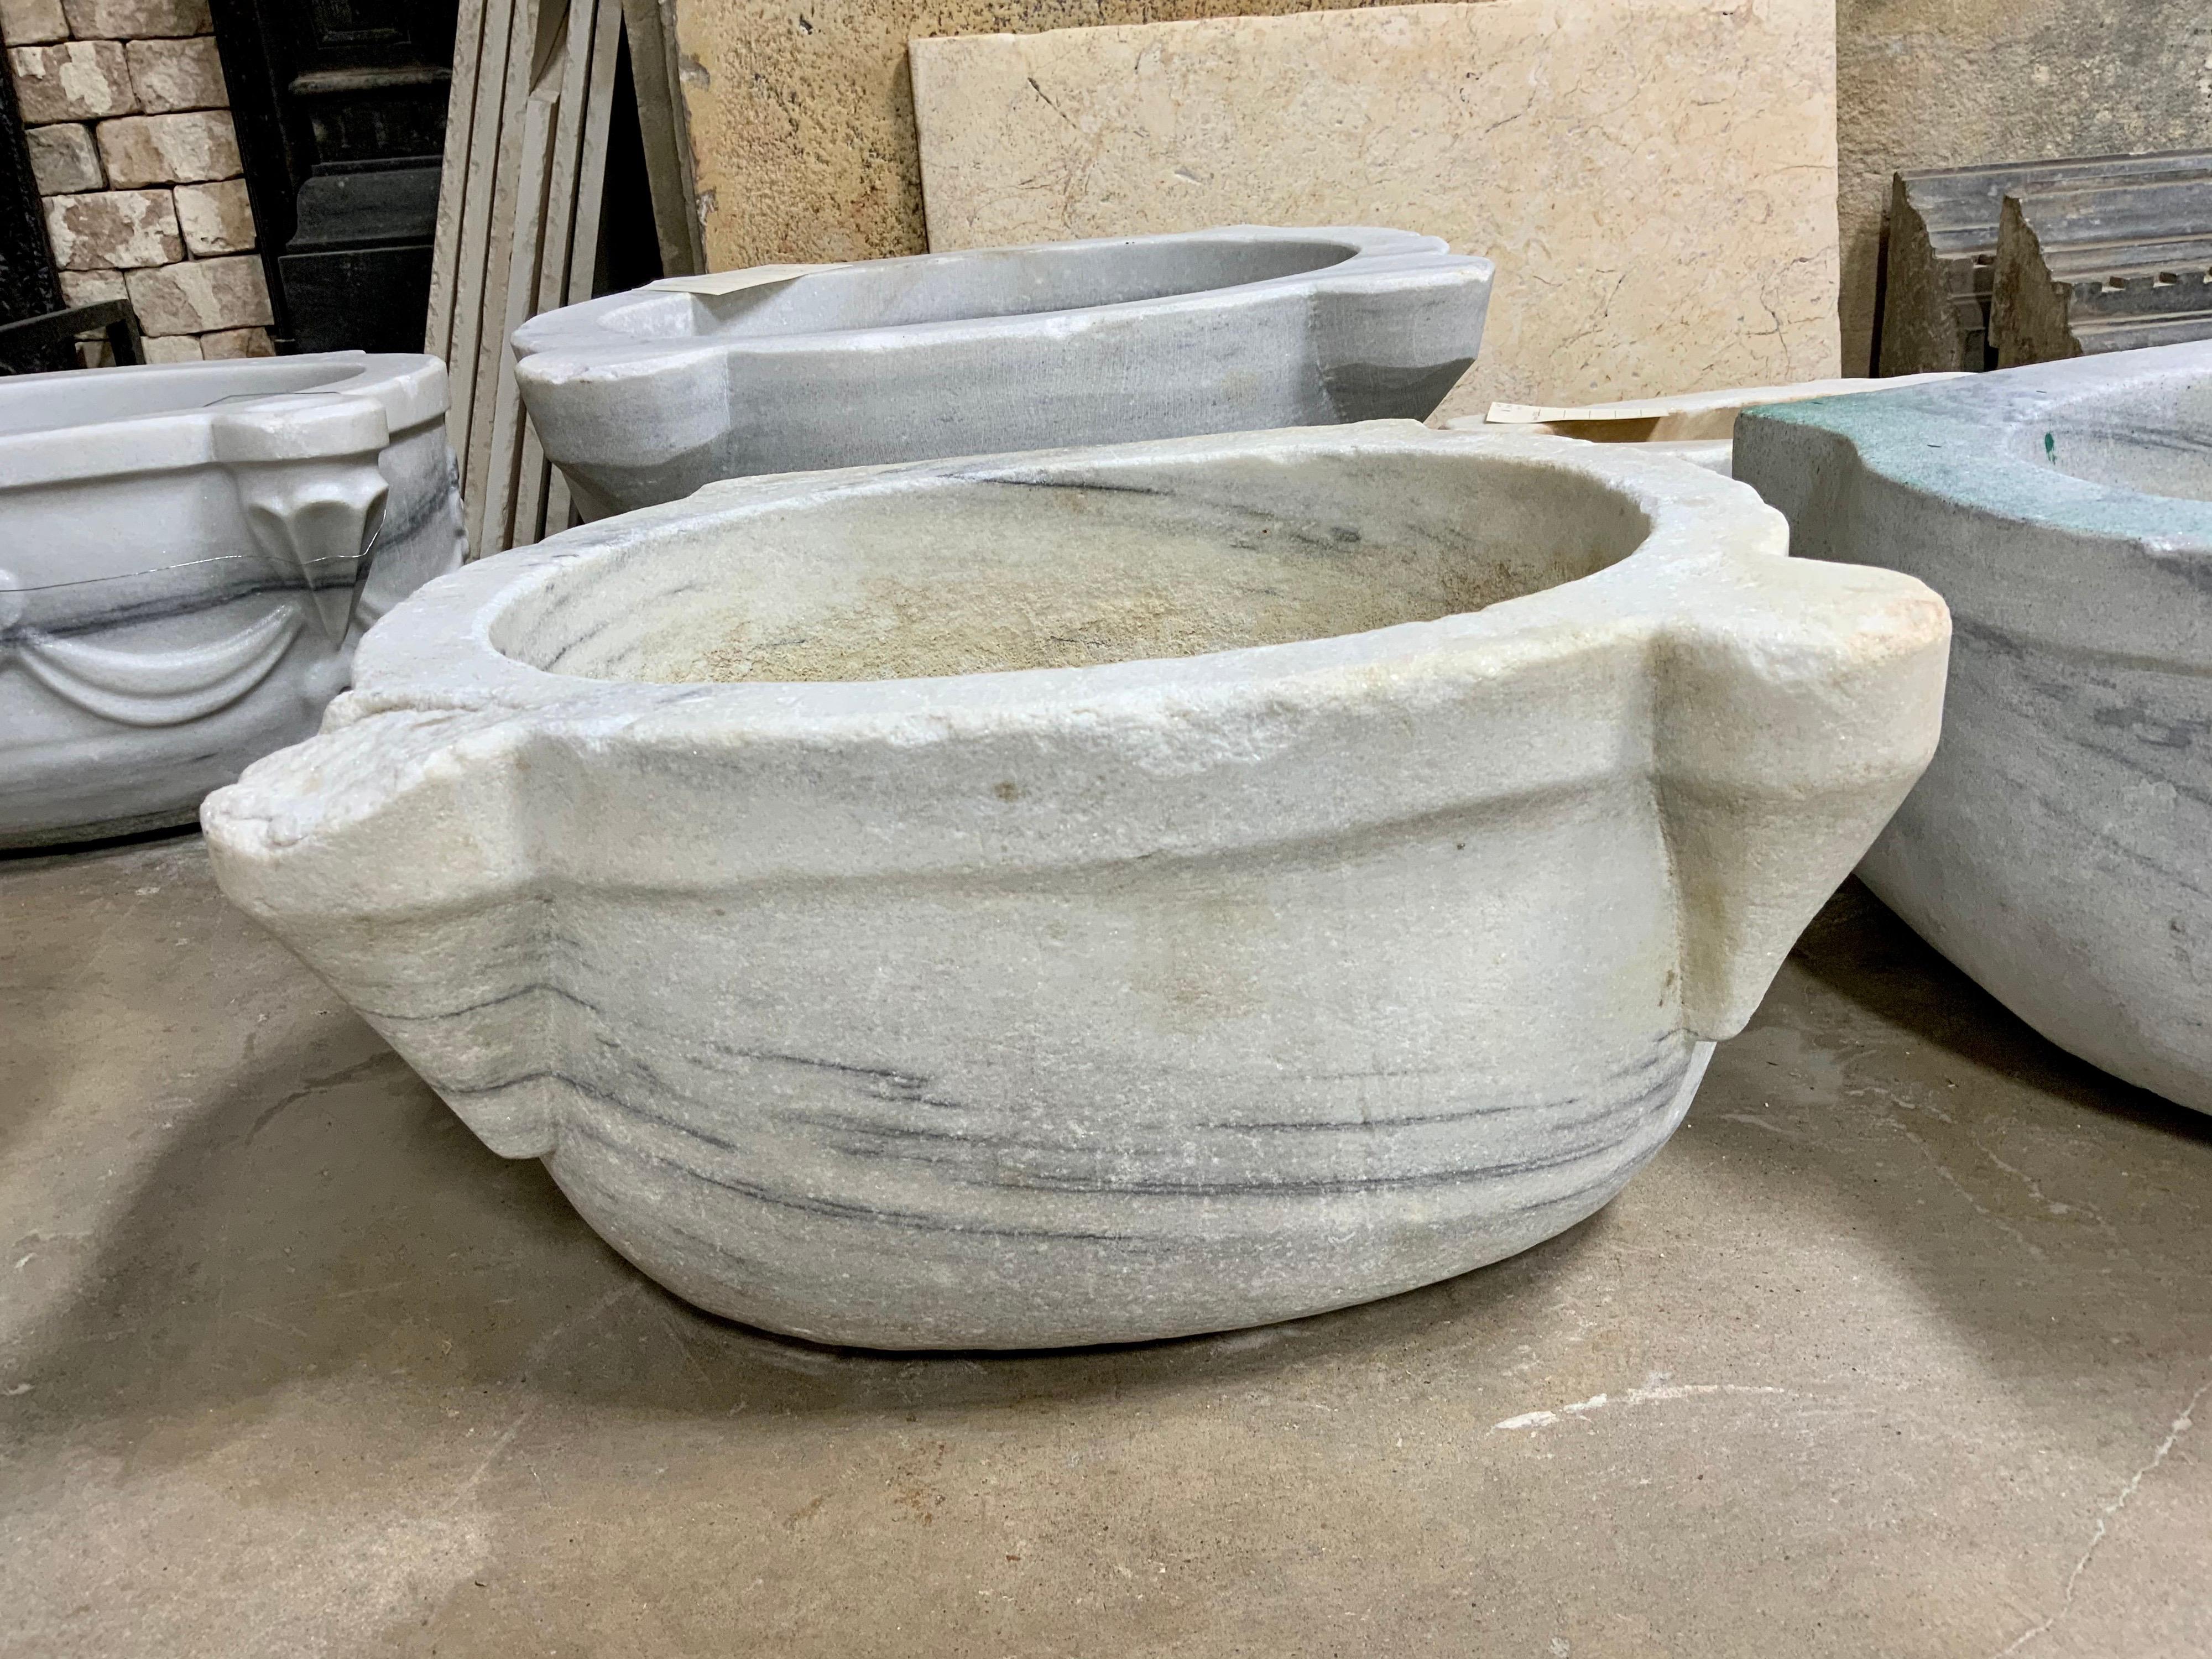 This marble sink origins from Greece, circa 1850.

Very simple and chic.

If purchased we can drill and fit a drain for this item. However, it will need to be sent to us.